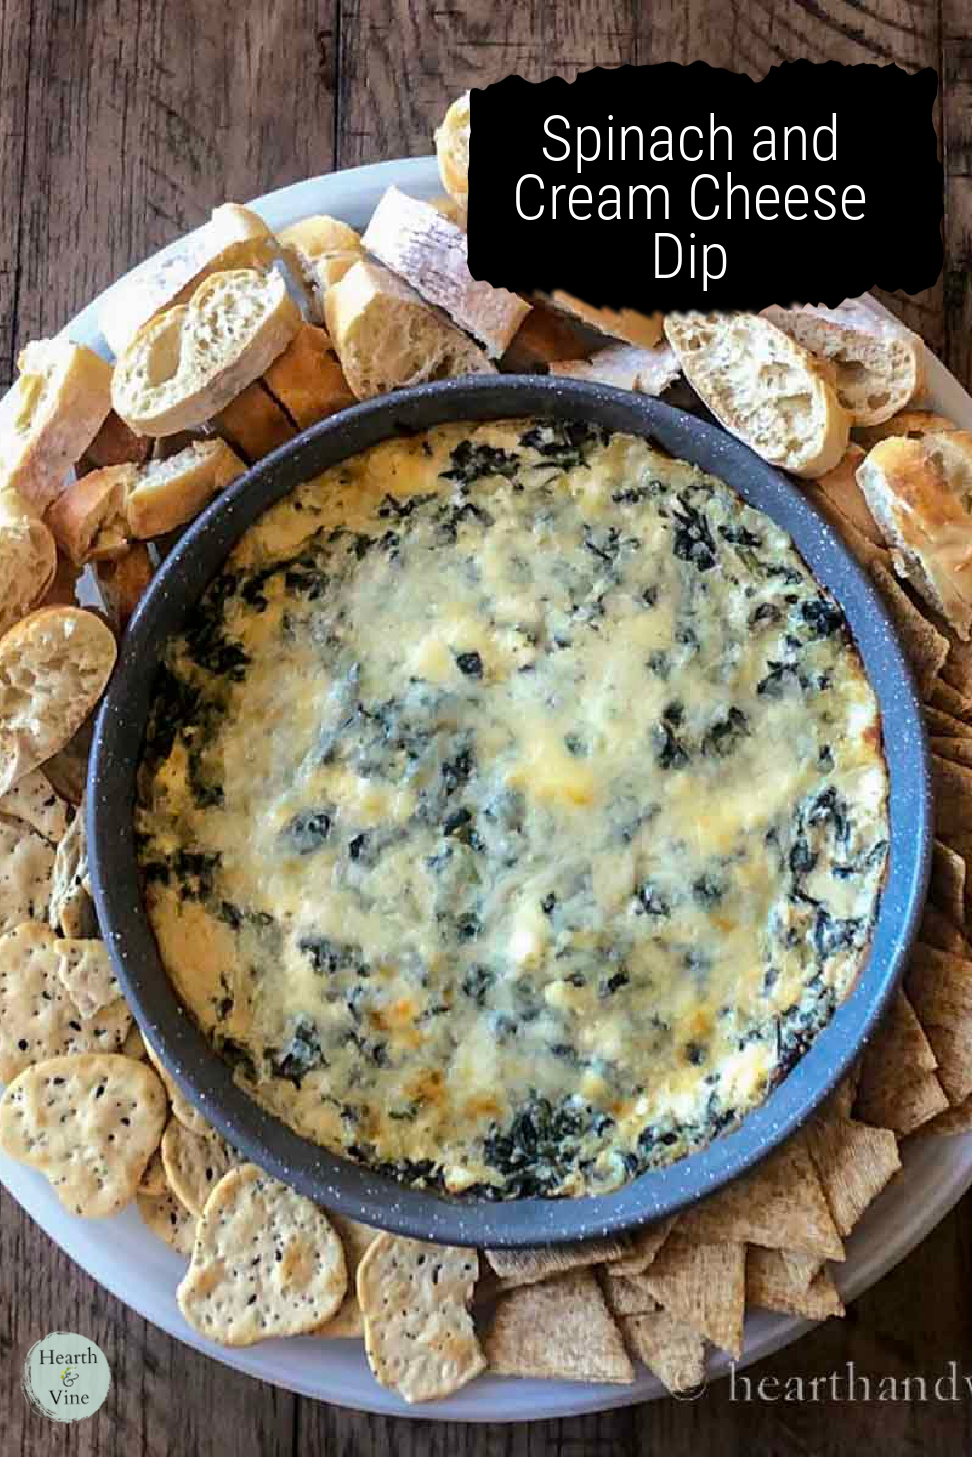 Aerial view of baked spinach dip with sliced bread and crackers.